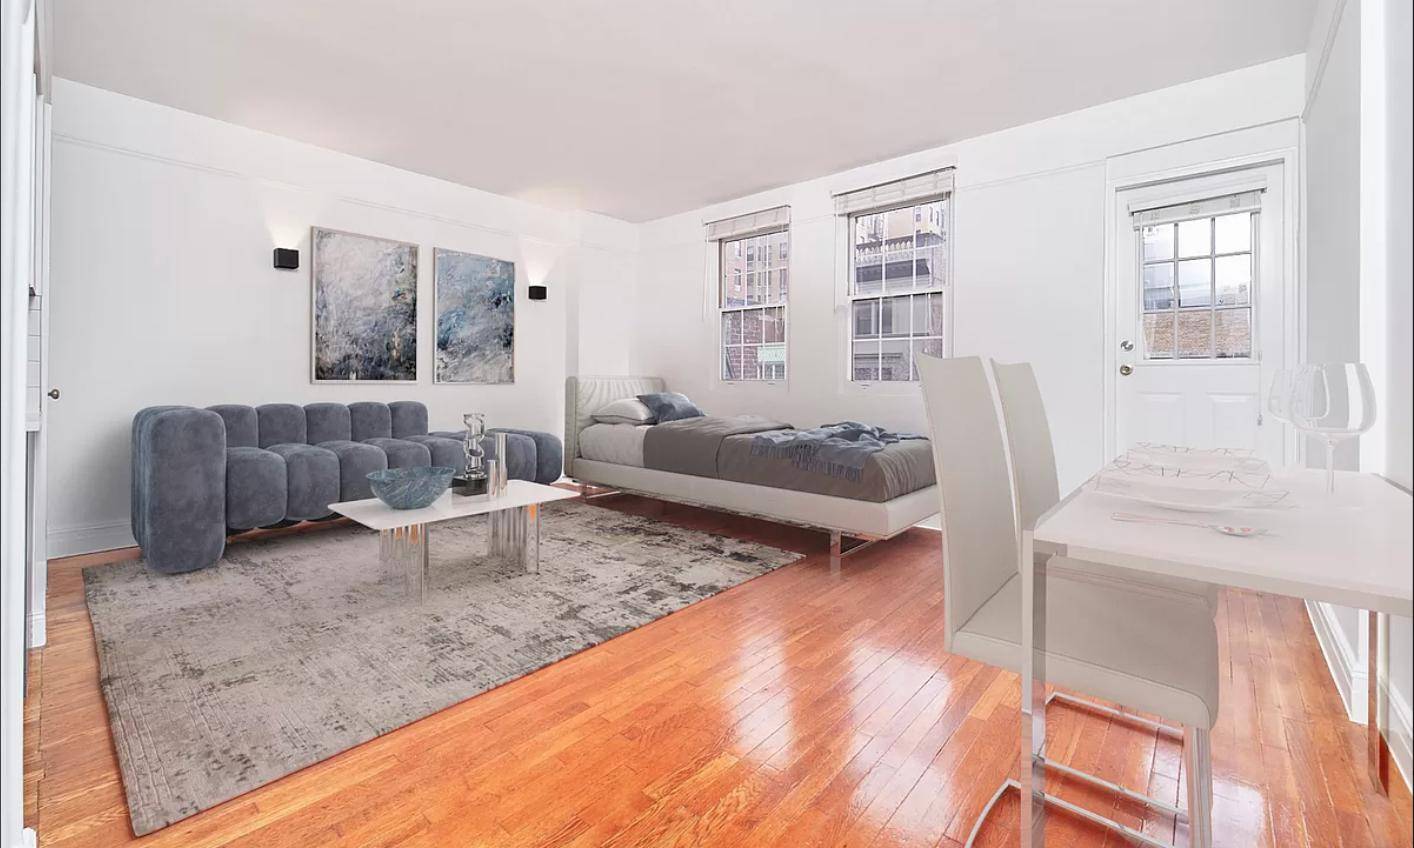 PRISTINE, RENOVATED STUDIO ON 73RD STREETAPARTMENT FEATURES Loft Style Studio With Skylight PRIVATE Terrace Recessed Lighting Gut Renovated Kitchen and Bathroom High Ceilings amp ; Hardwood Floors Amazing Natural Sunlight ...